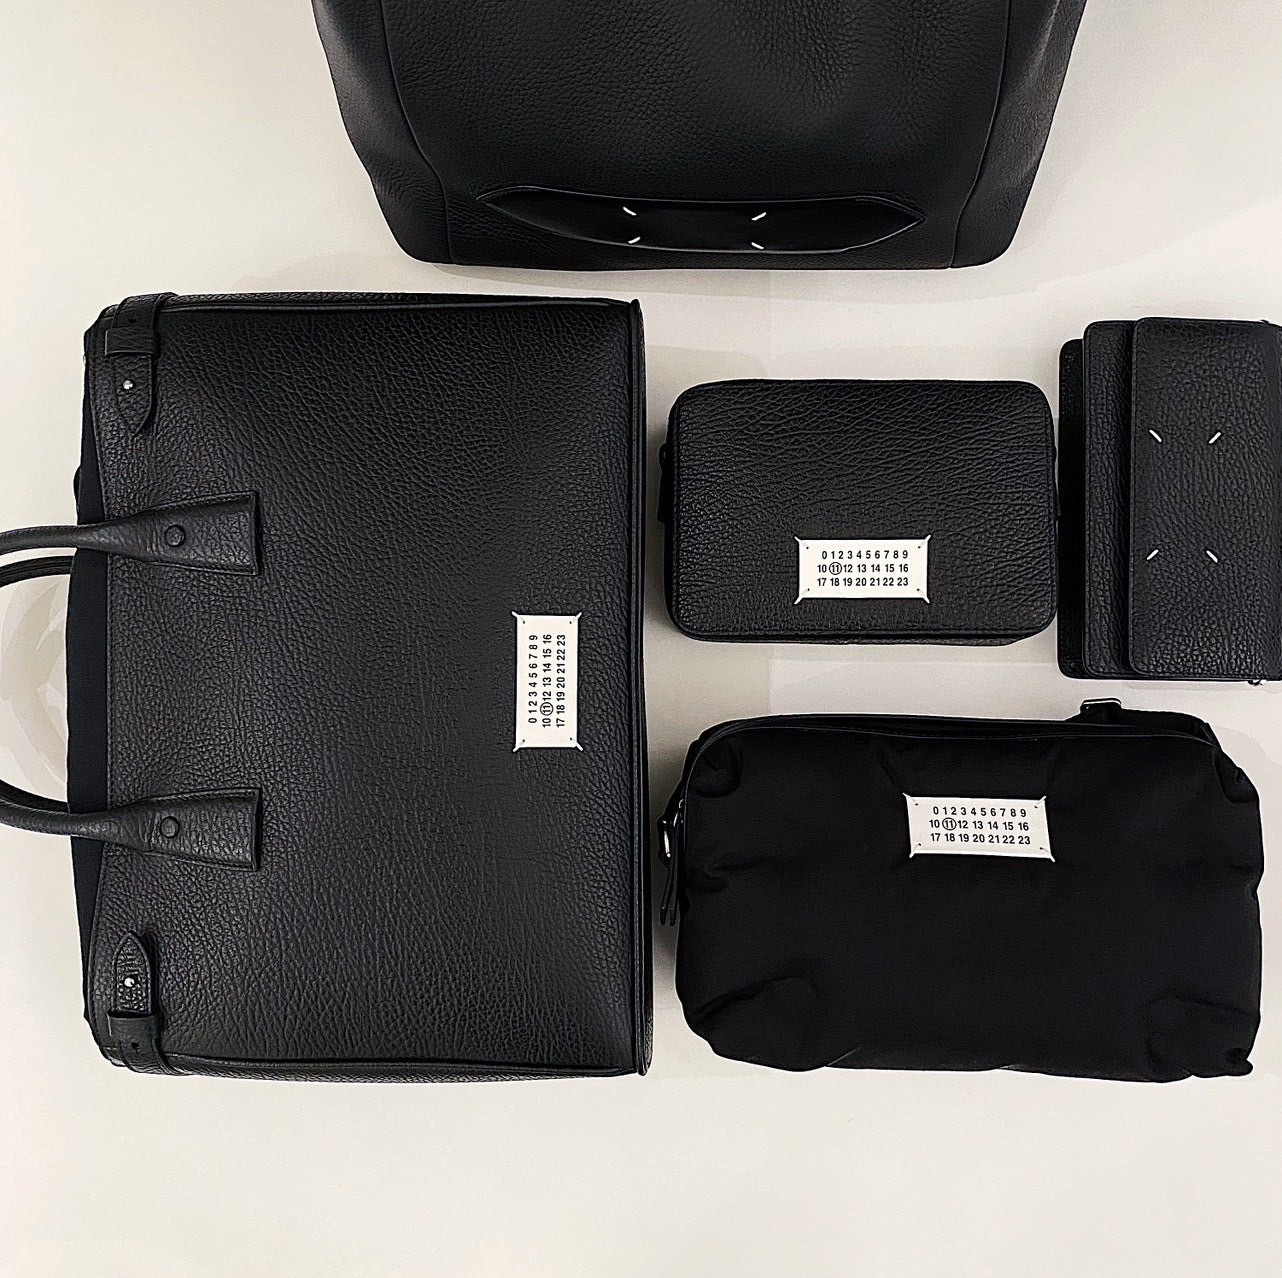 【Maison Margiela】<br> A lineup of new accessories such as bags and wallets has started from 23AW items!